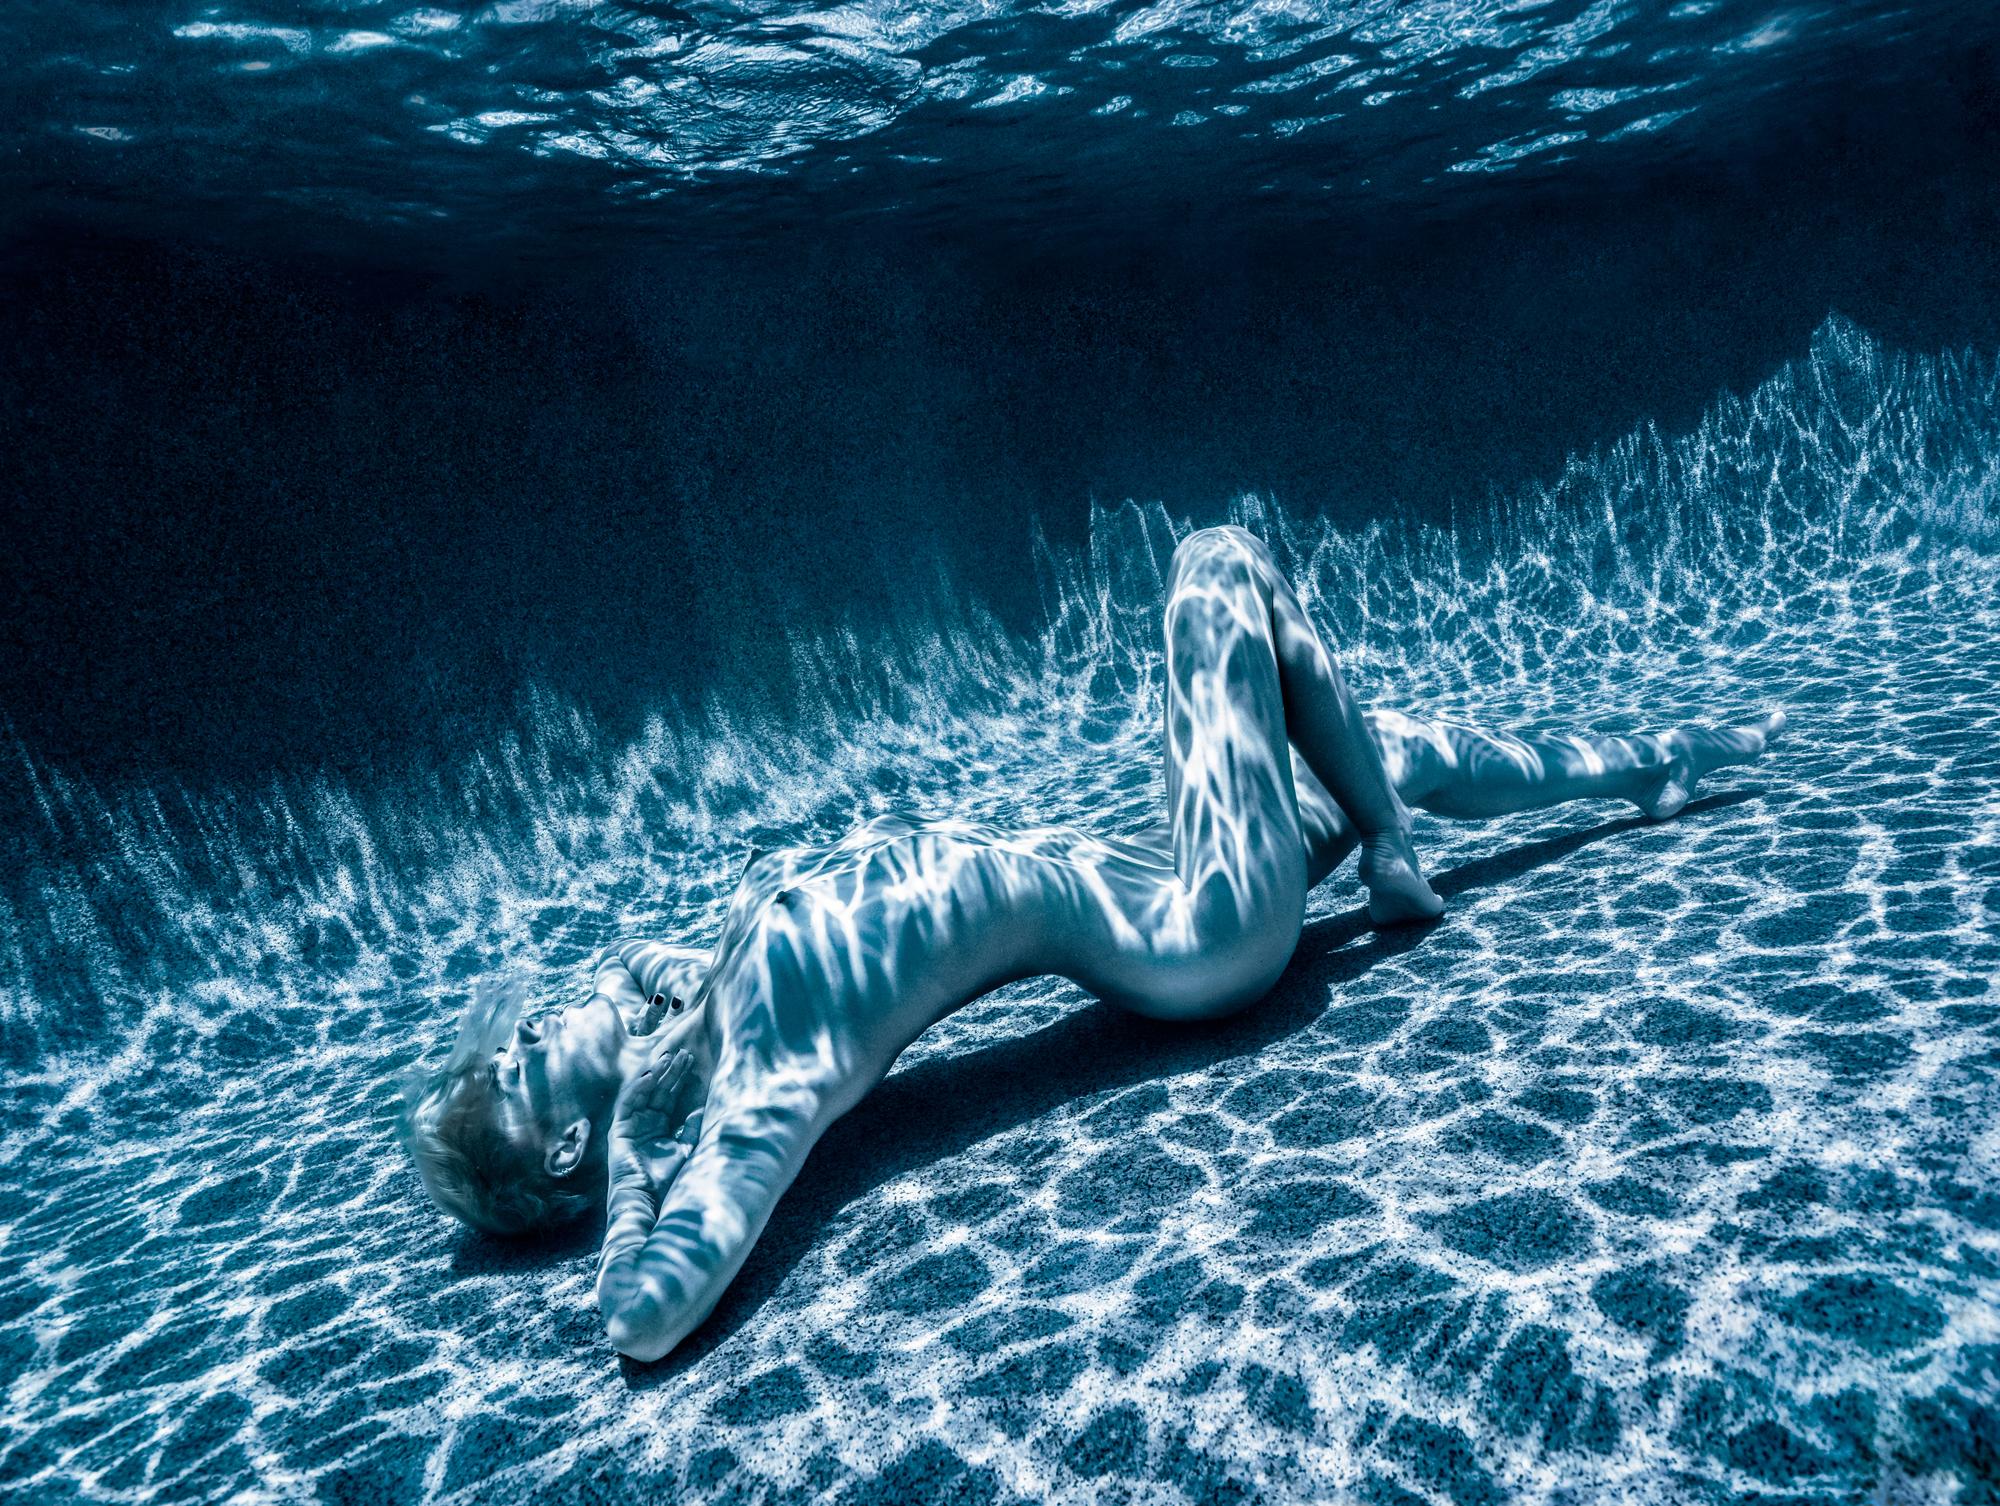 Alex Sher Nude Photograph - Moonlight - underwater nude photograph - archival pigment print 18x24"